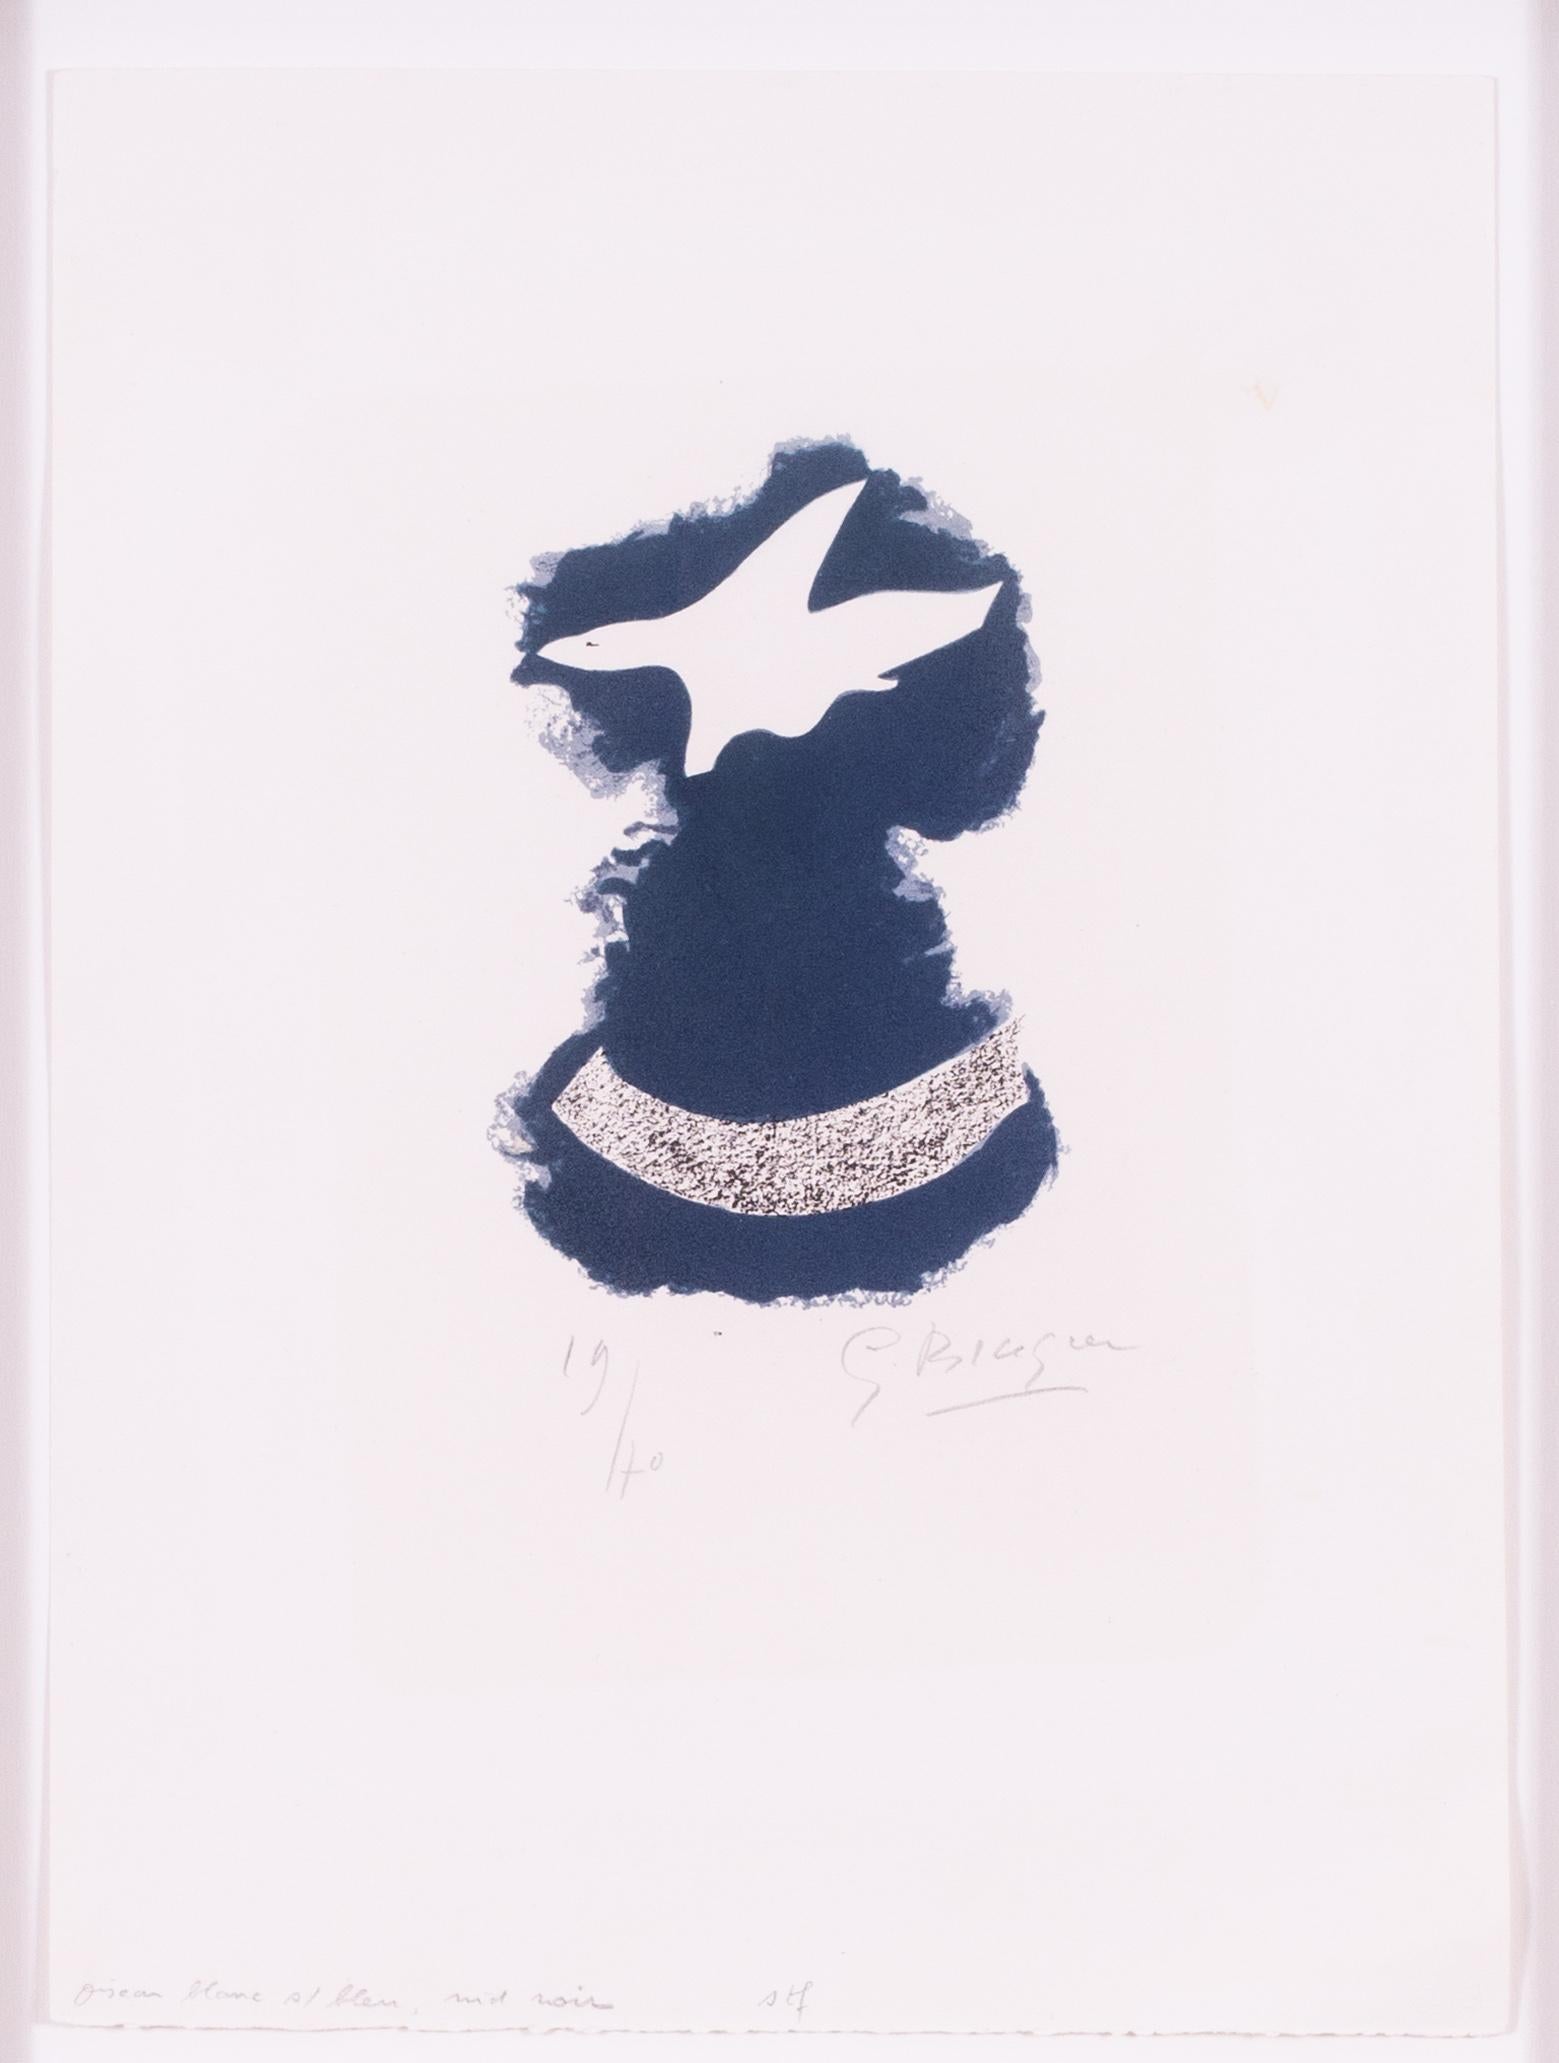 Georges Braque signed and numbered lithograph, 1960 'Le Tir a l'Arc' 1